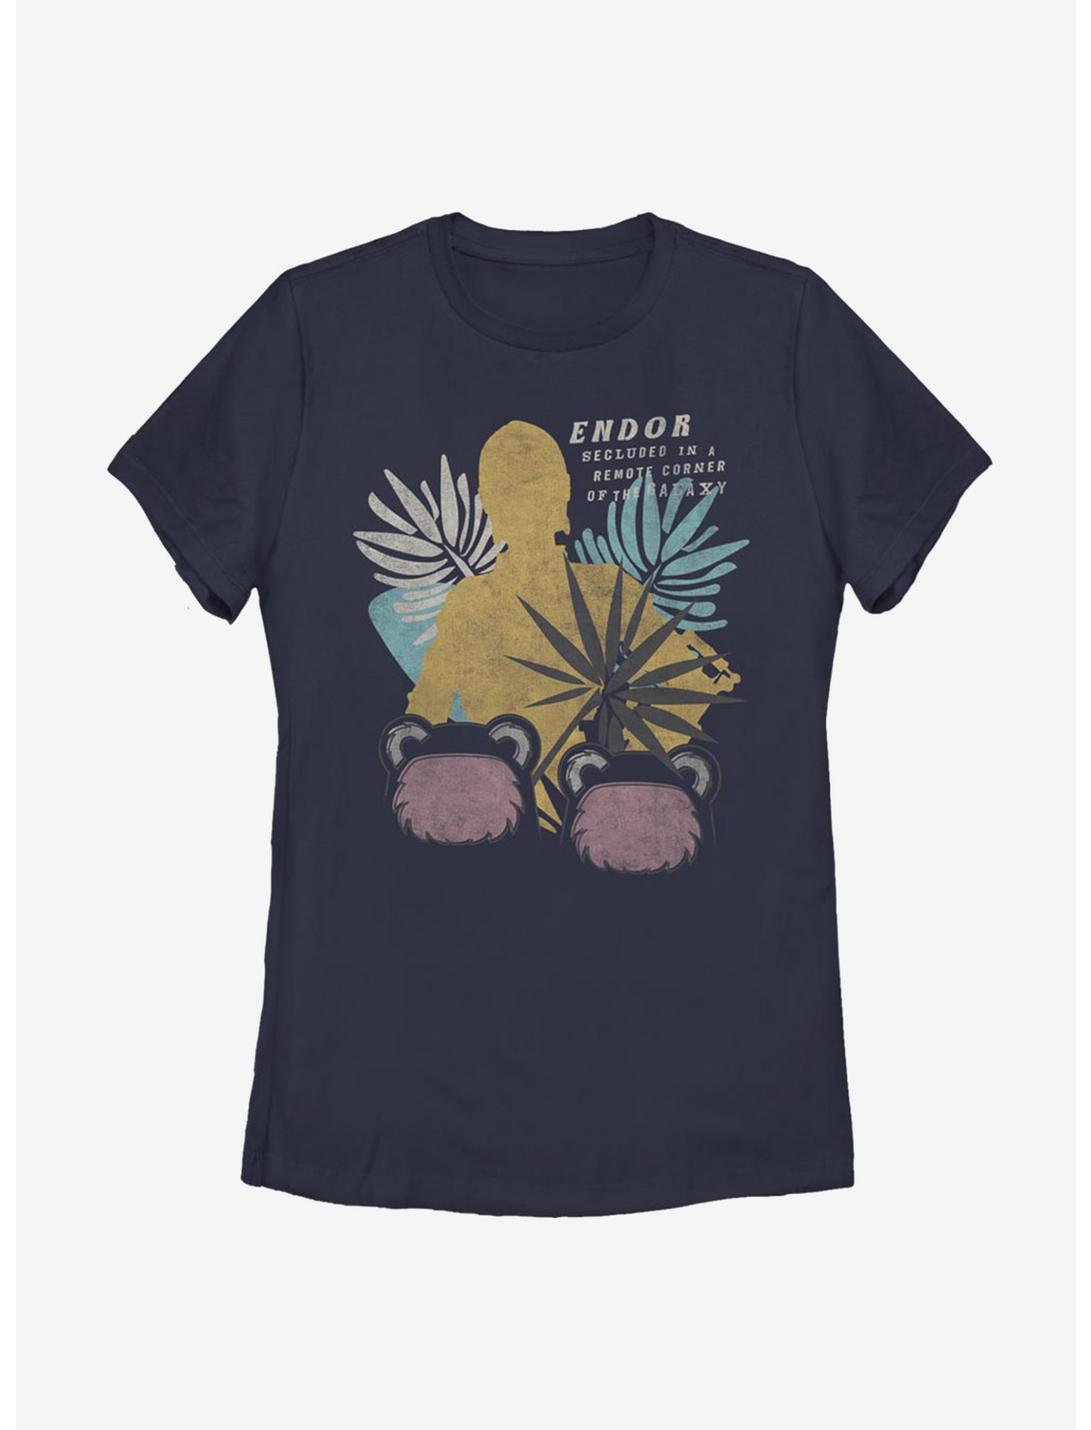 Star Wars Endor Secluded Womens T-Shirt, NAVY, hi-res